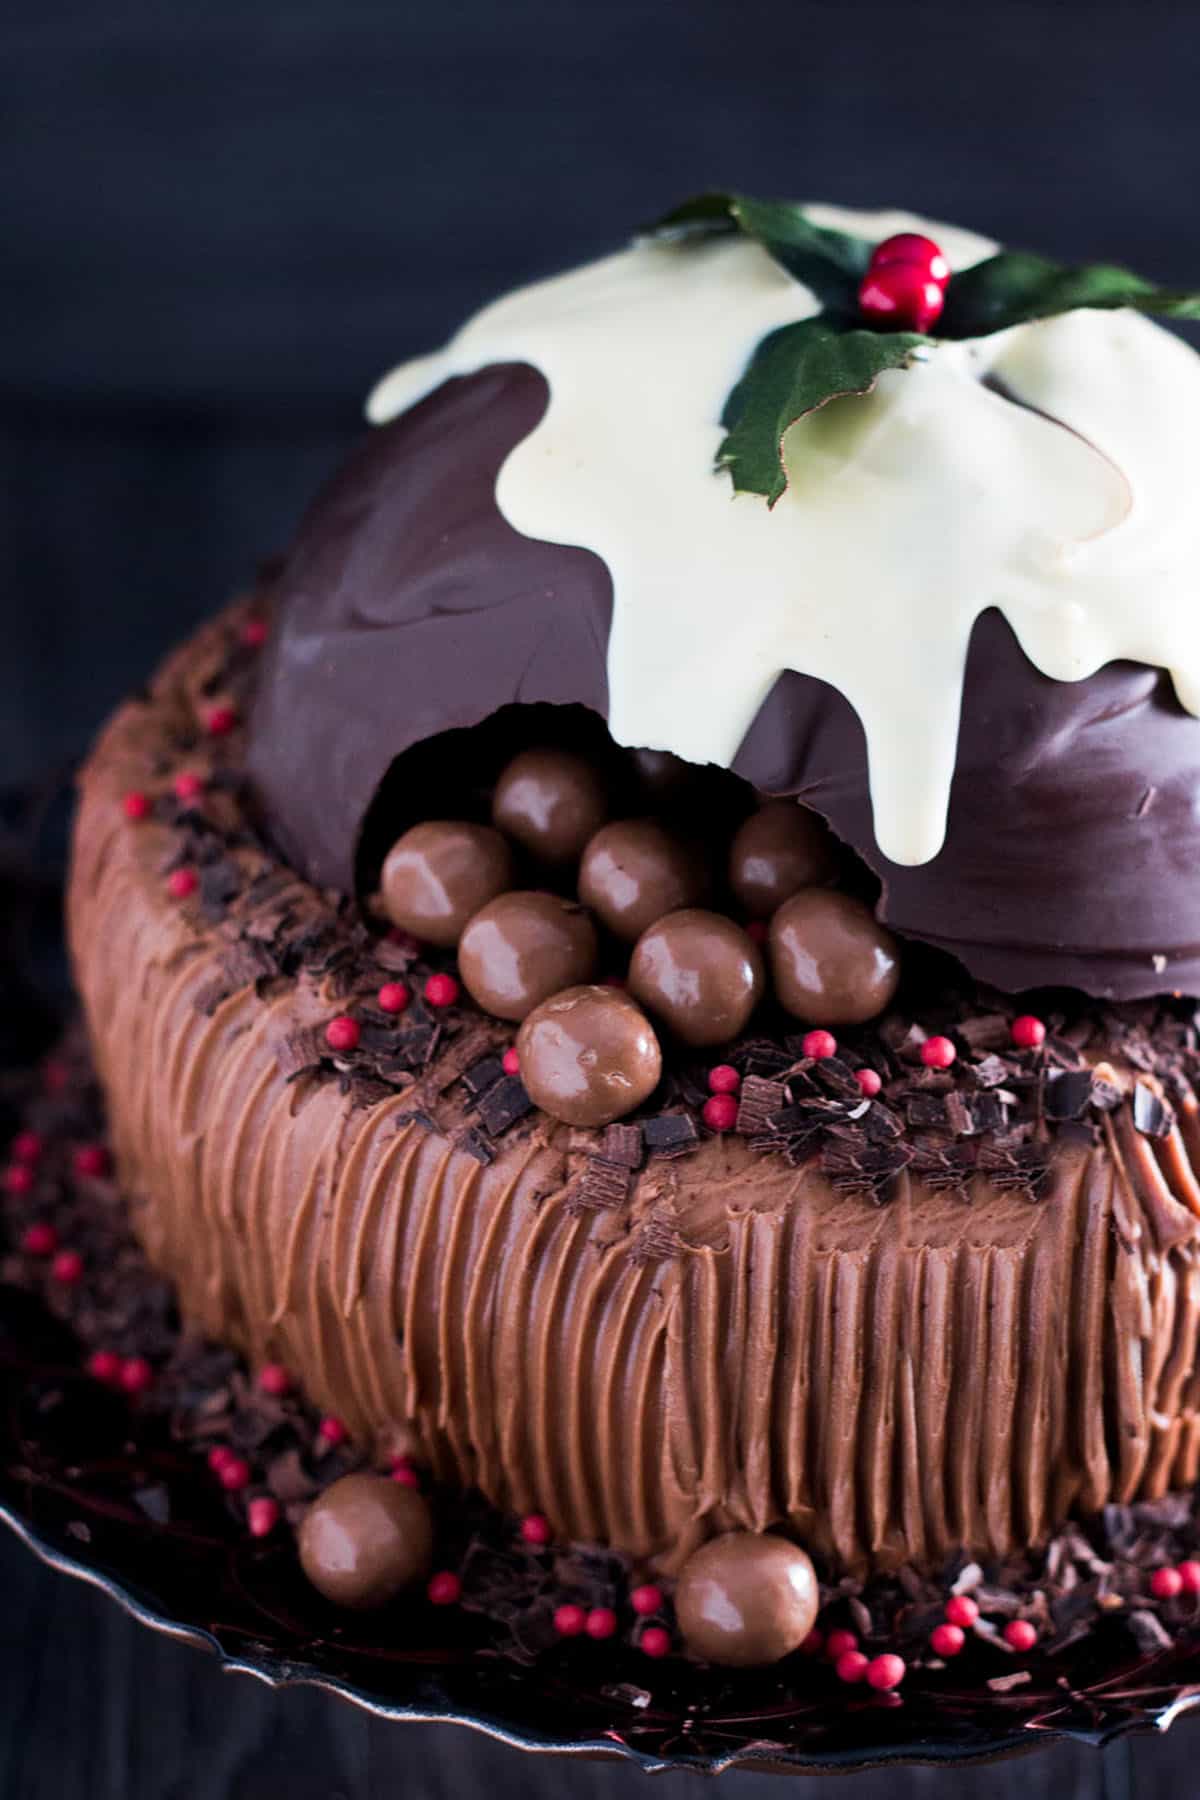 Share more than 88 best chocolate christmas cake - awesomeenglish.edu.vn